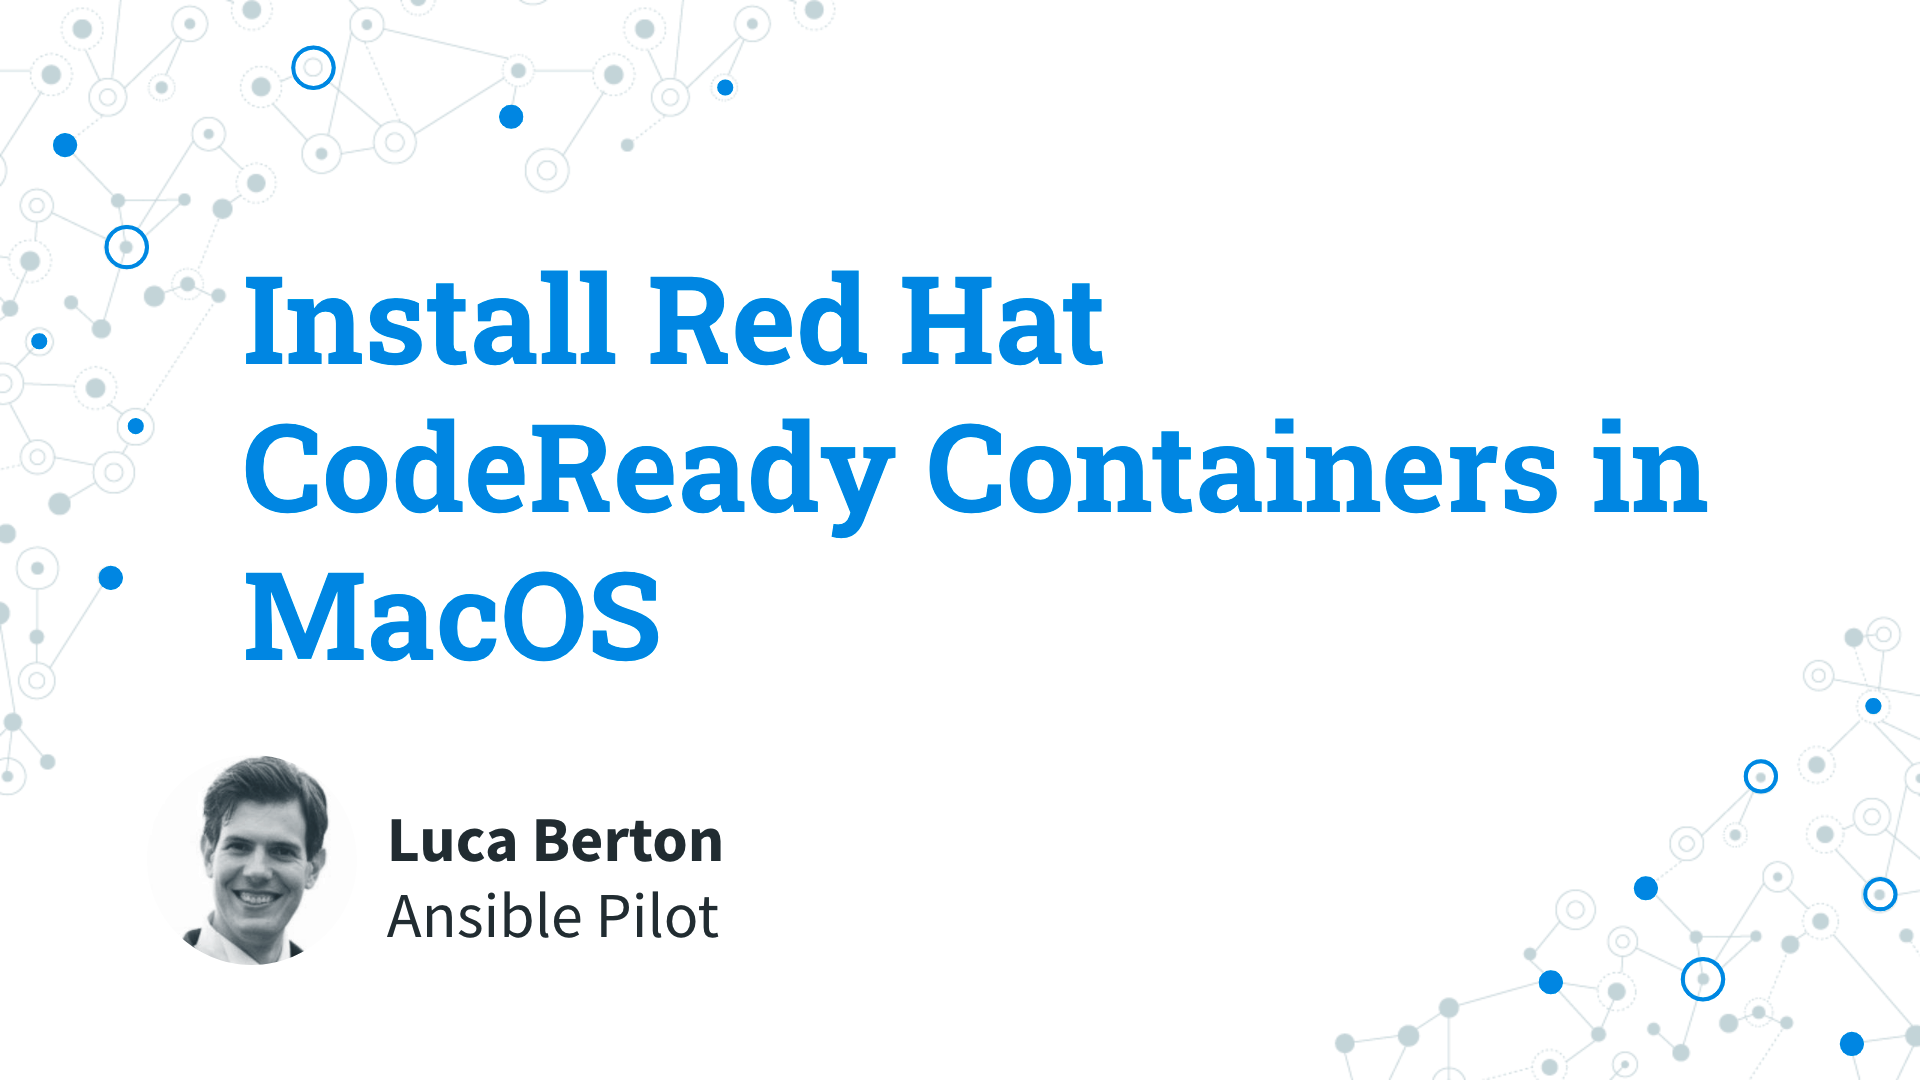 Install Red Hat CodeReady Containers to run OpenShift 4 in macOS